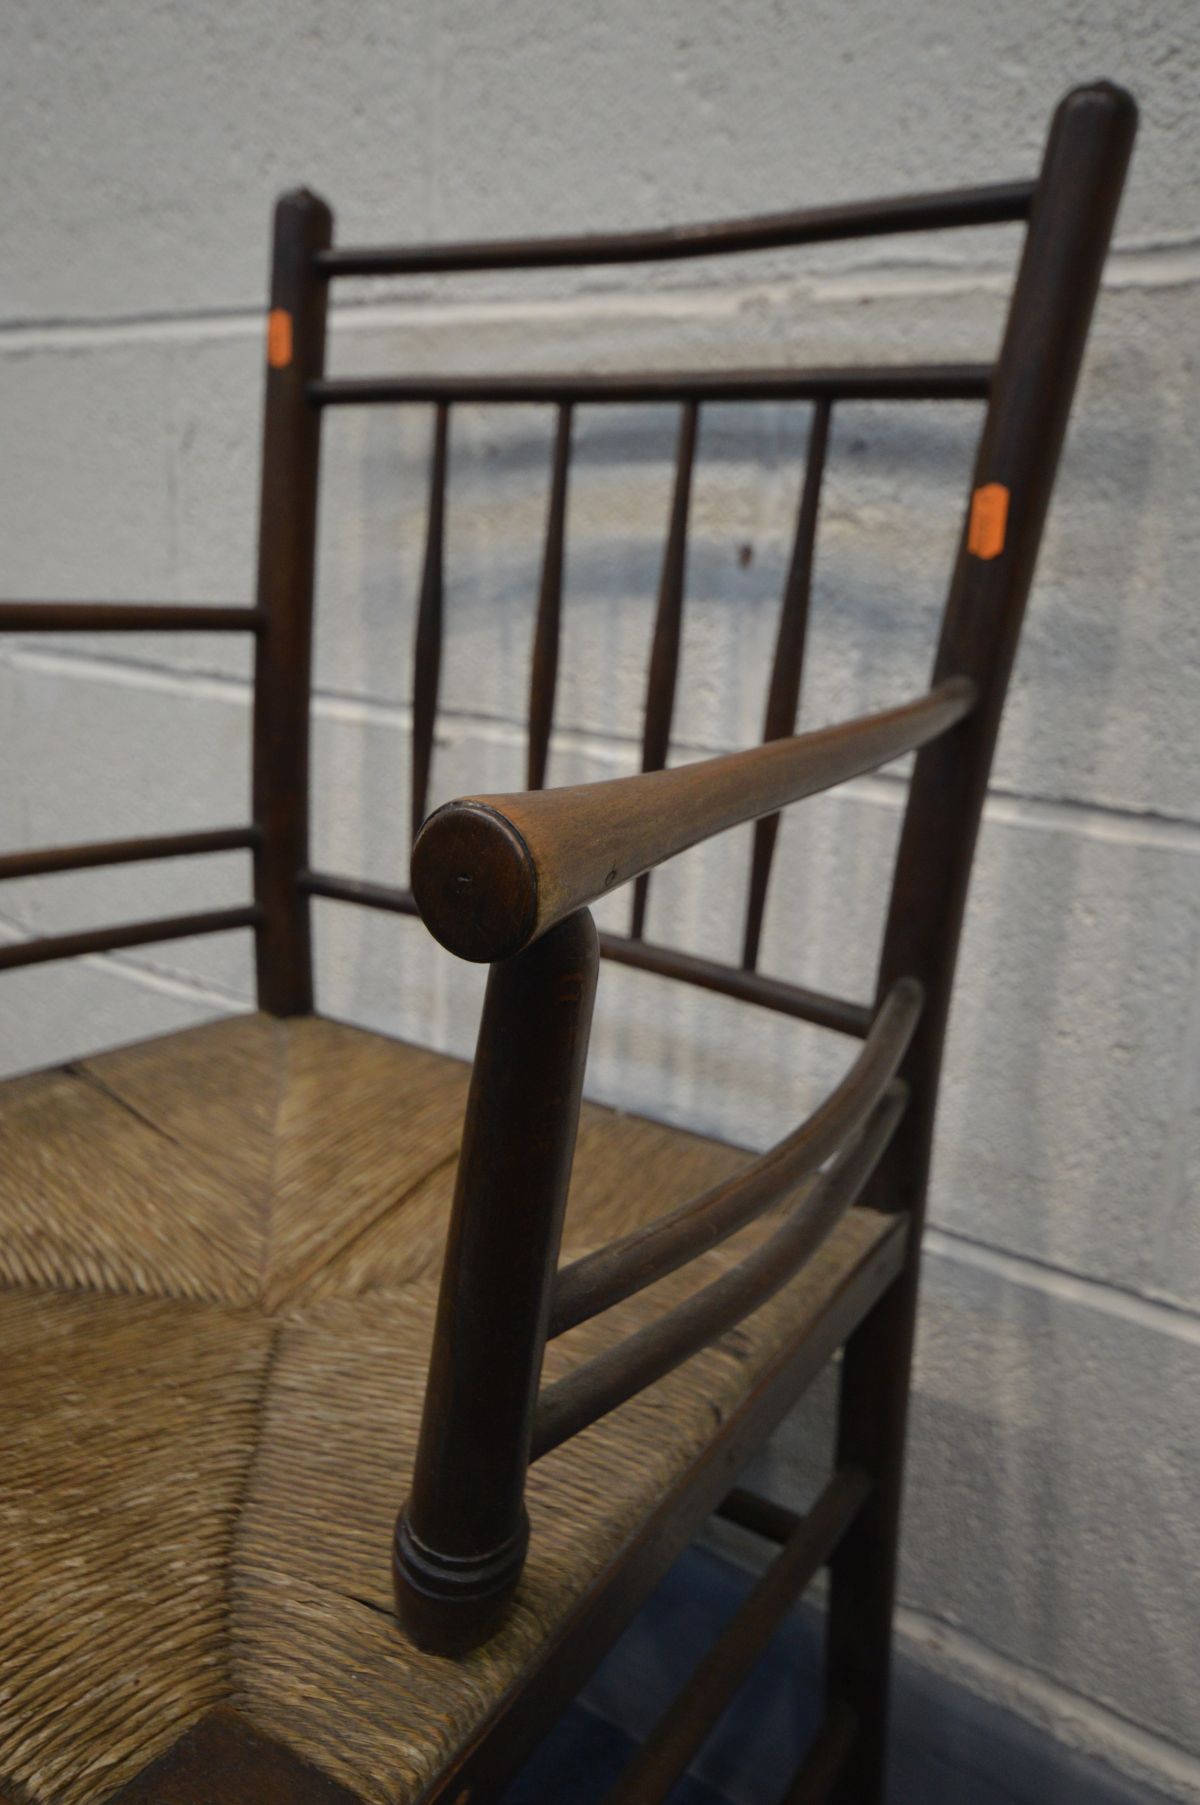 IN THE MANNER OF MORRIS & CO SUFFOLK CHAIR, the back with spindles and horizontal rails, open arm - Image 3 of 4